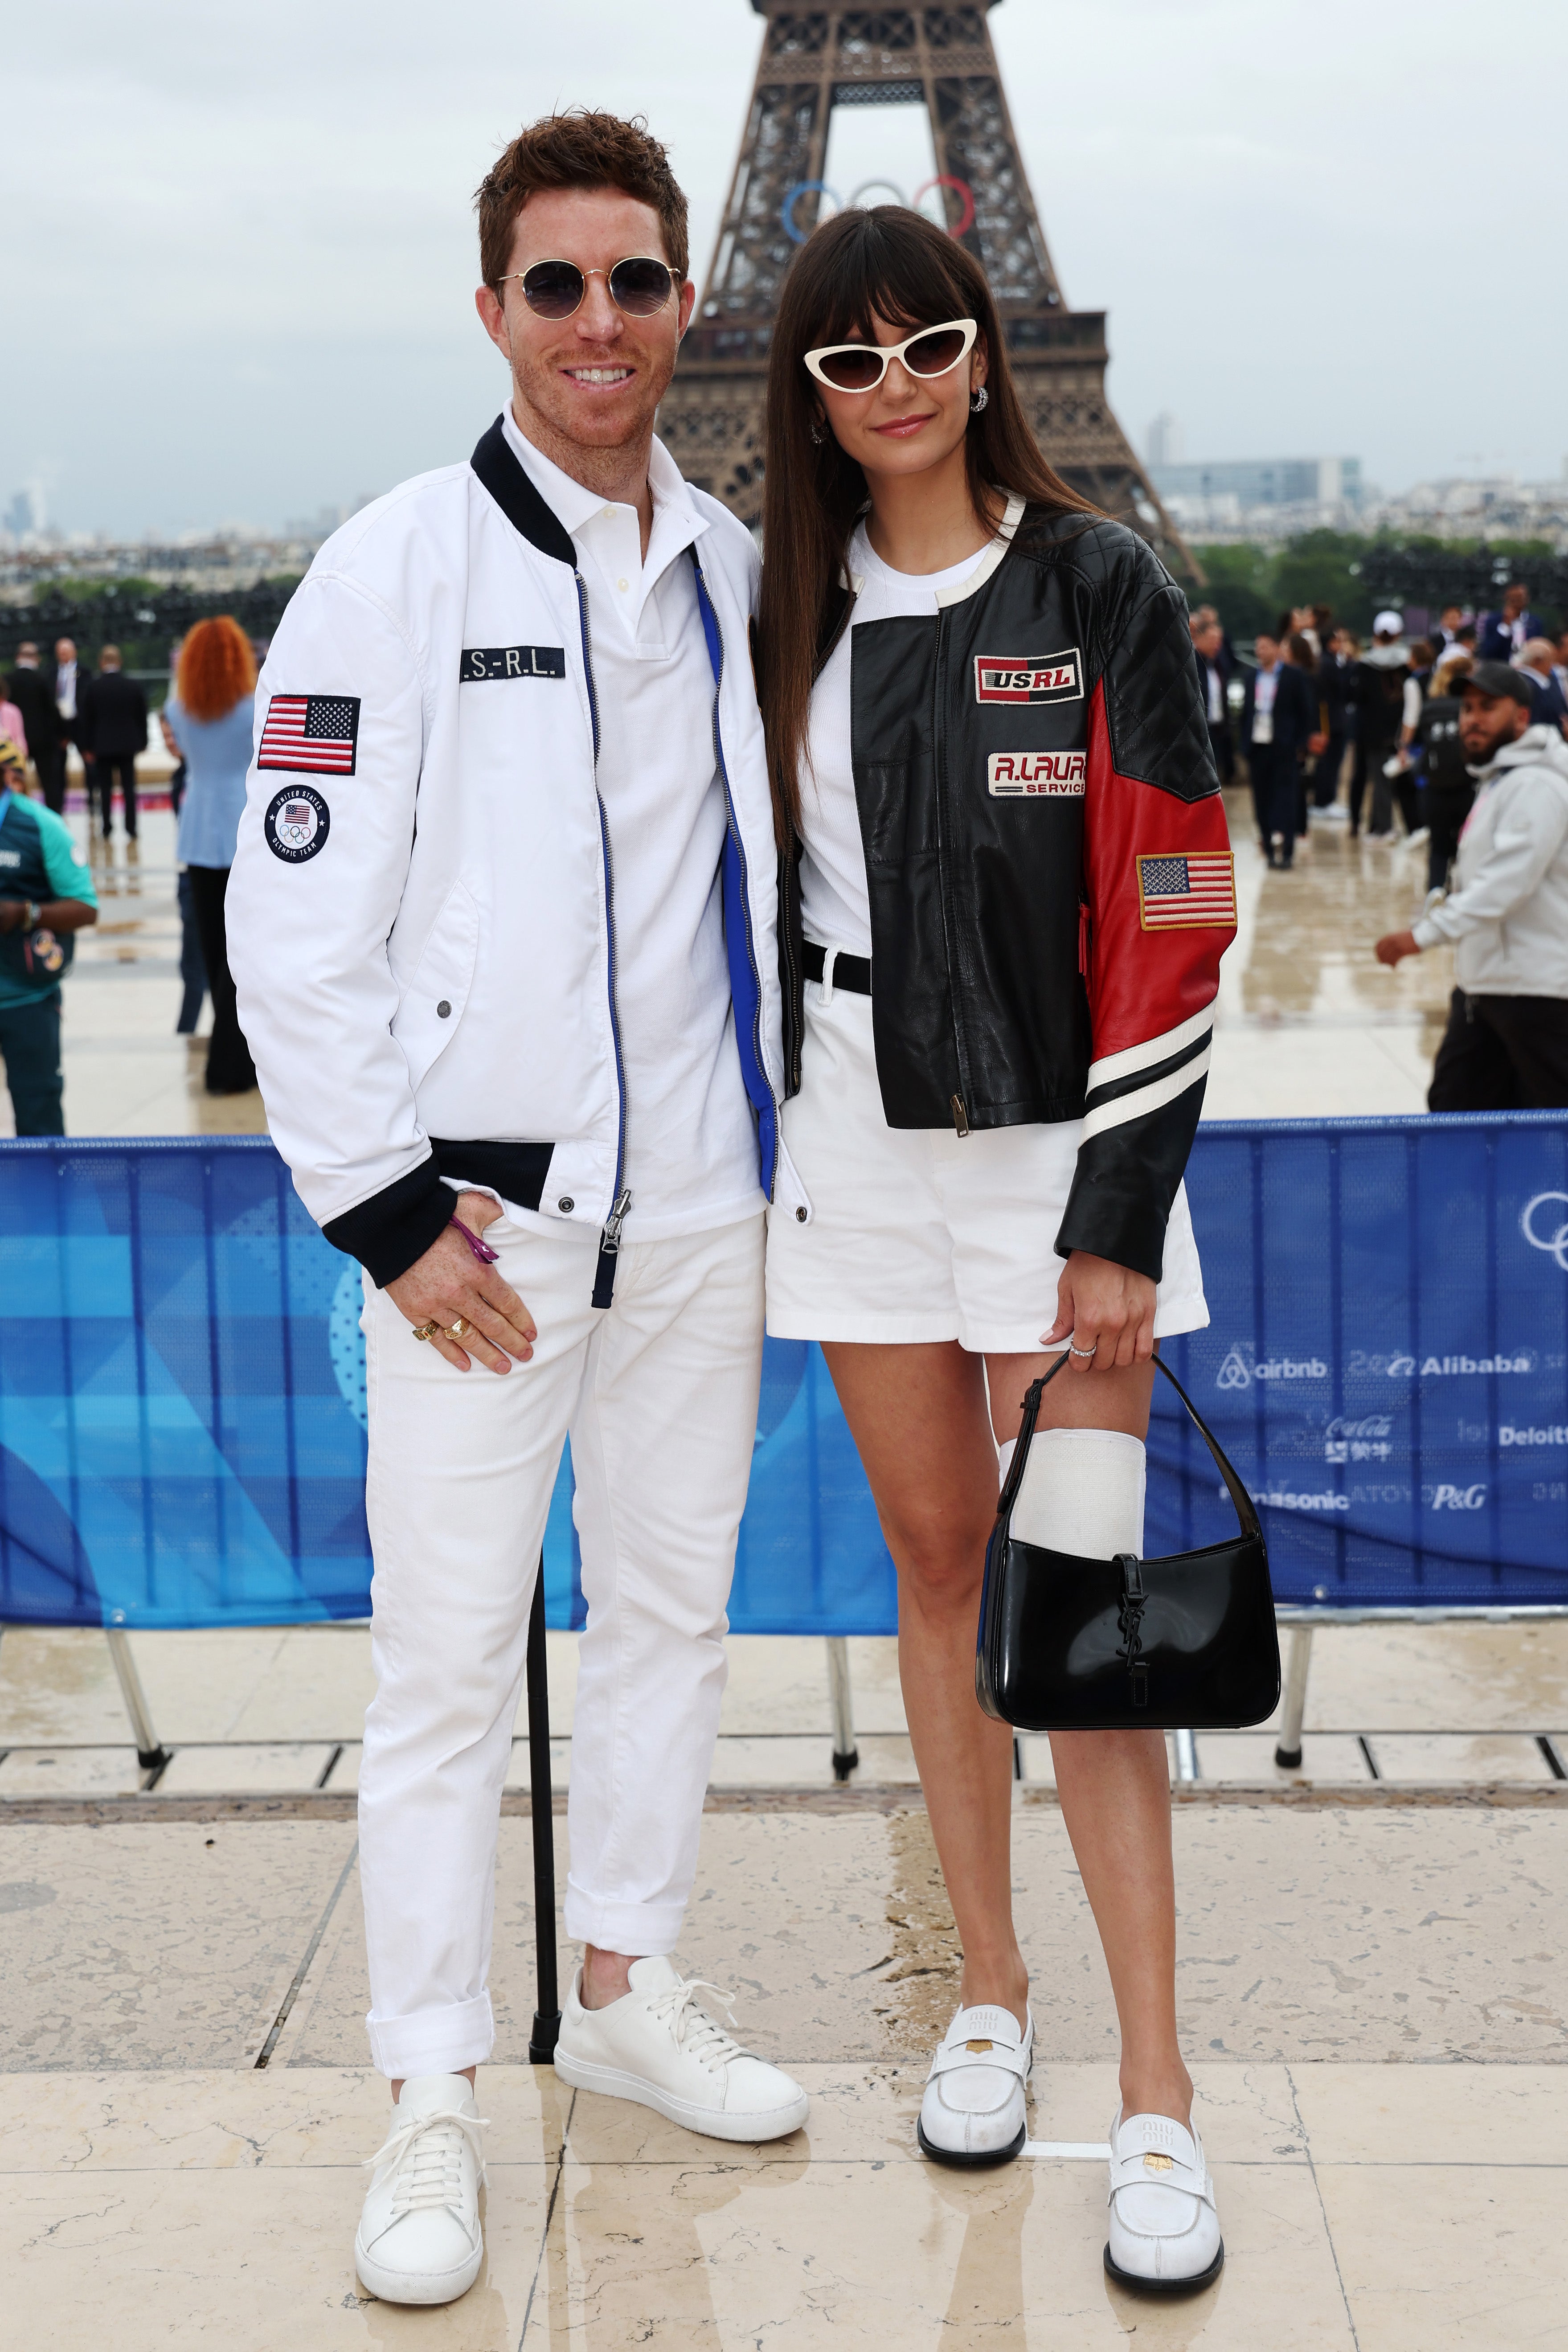 Both White and Dobrev sported Ralph Lauren apparel branded with American flag patches and the classic Olympic symbol.